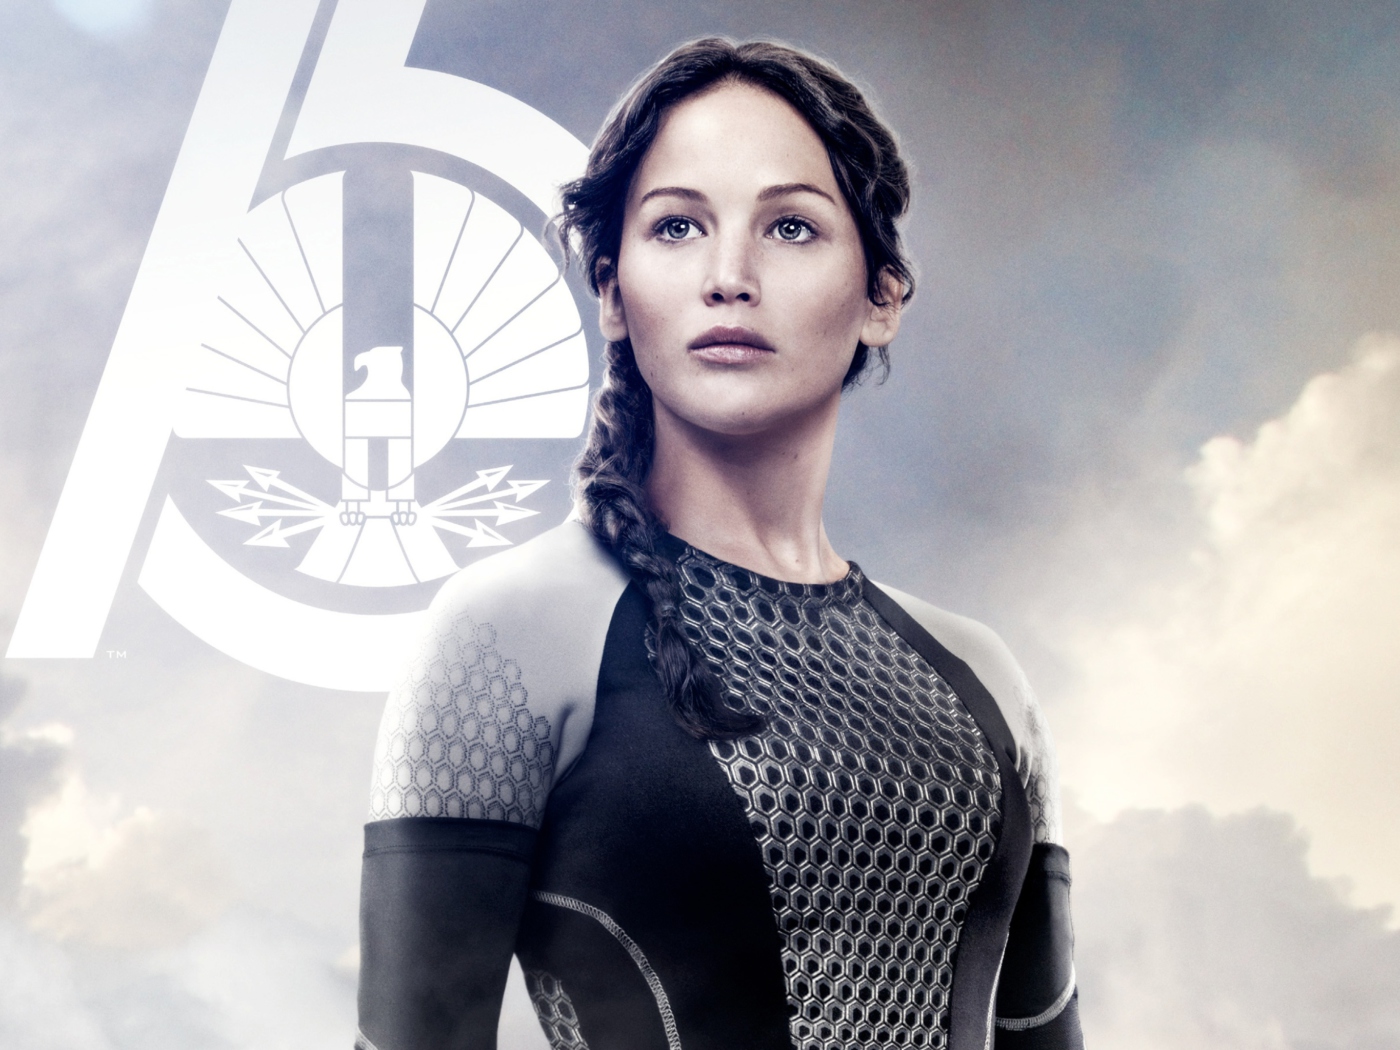 Jennifer Lawrence In The Hunger Games Catching Fire wallpaper 1400x1050